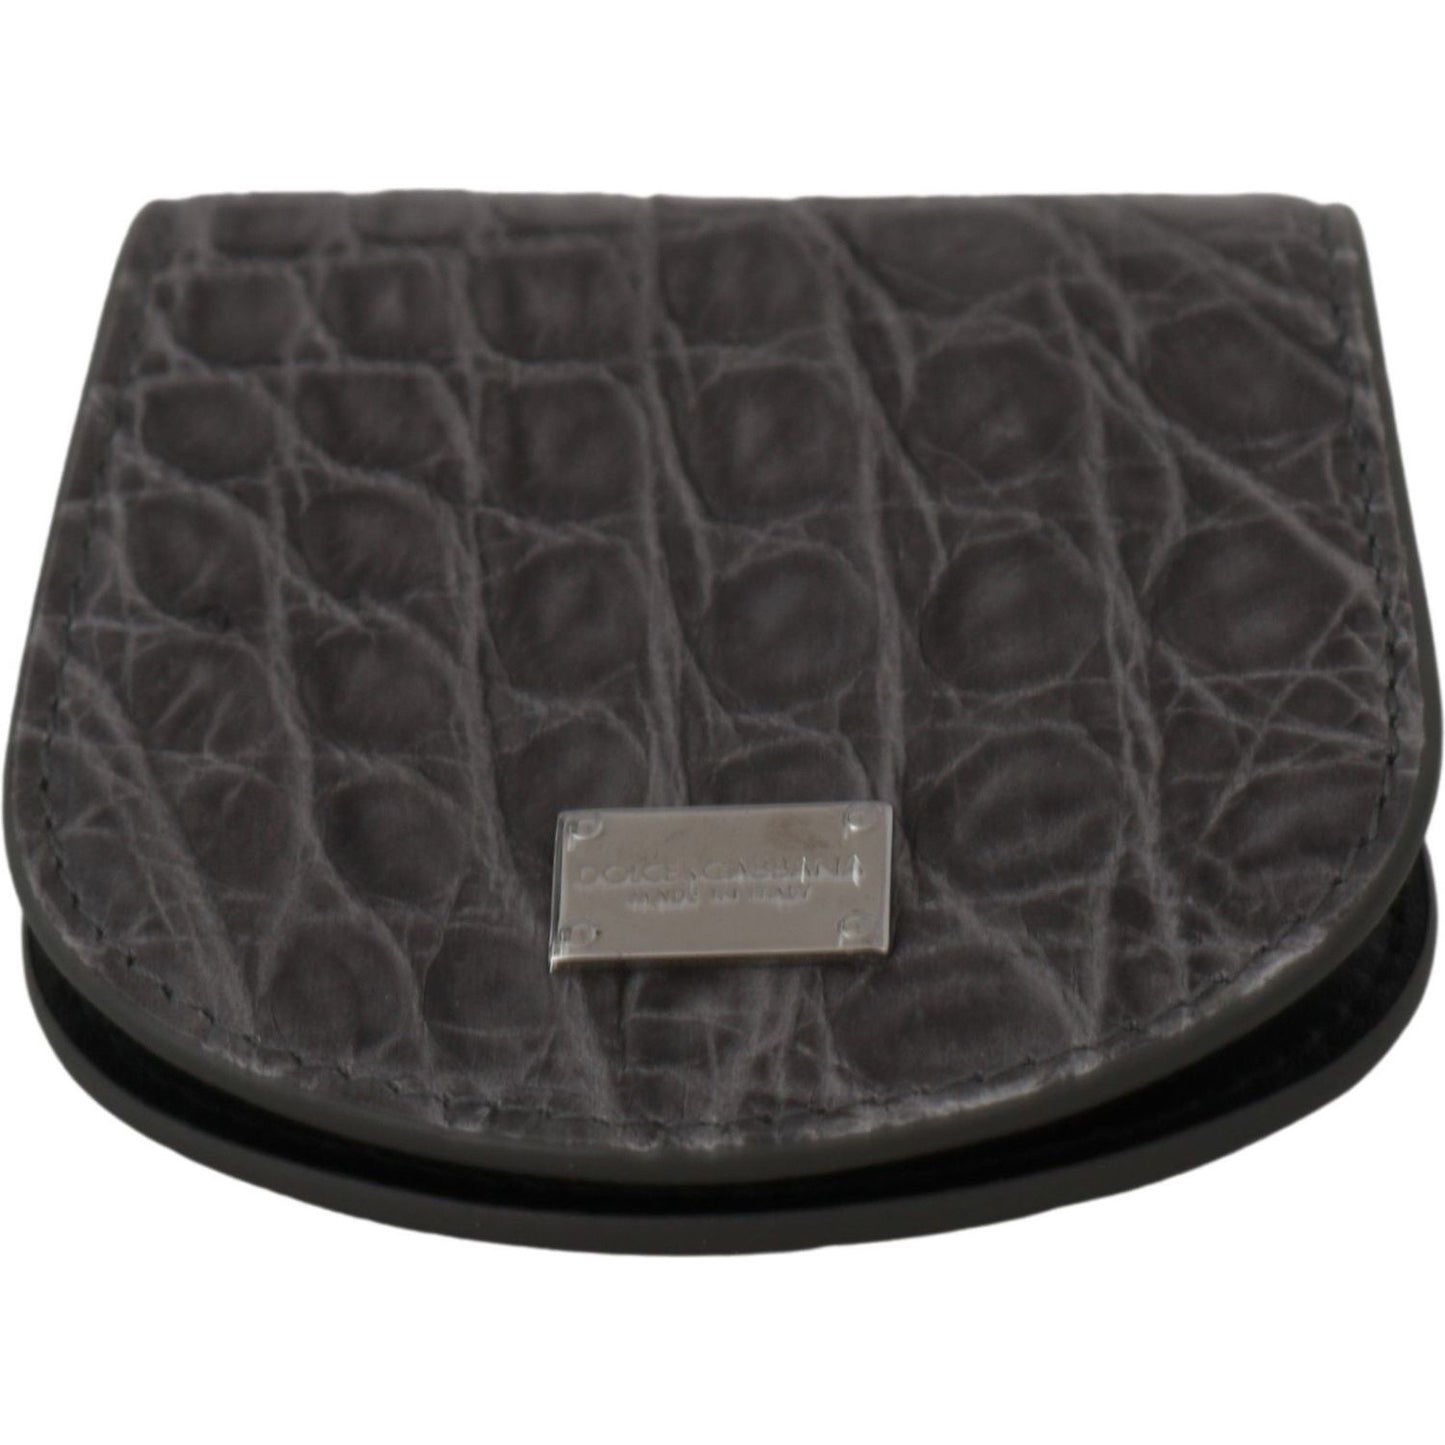 Dolce & Gabbana Exotic Gray Leather Condom Case Wallet Condom Case gray-exotic-skin-condom-case-holder-pocket-wallet